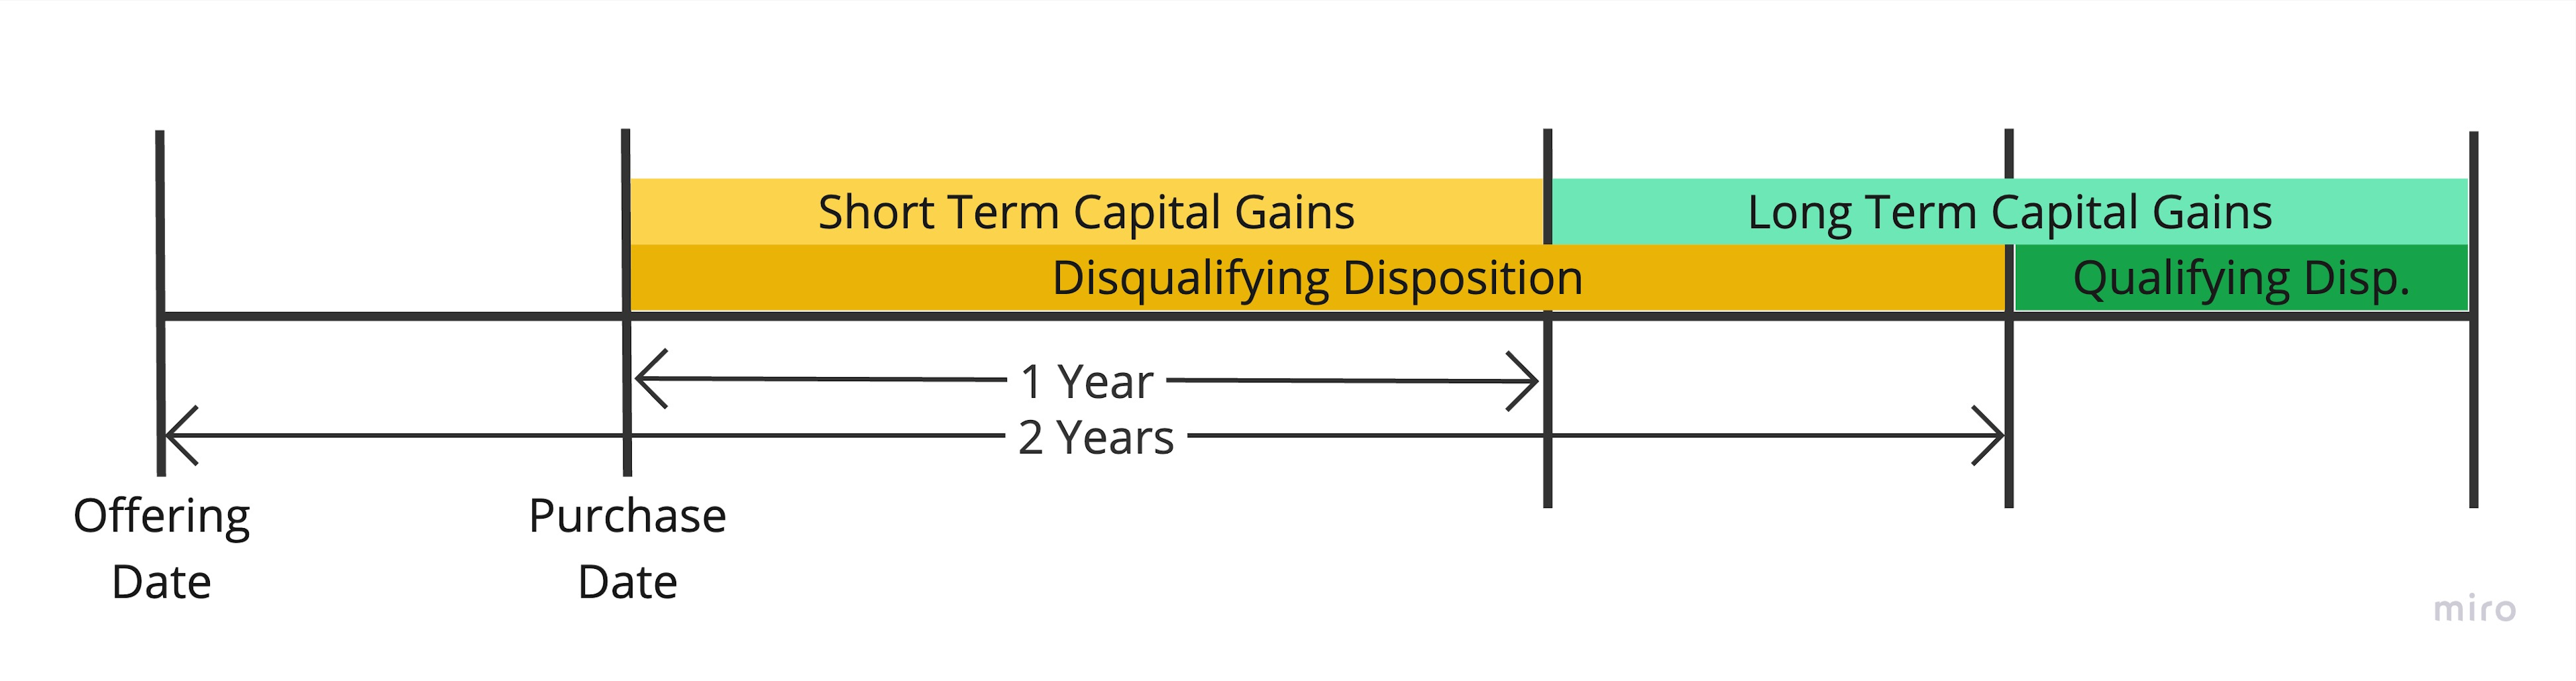 Timeline graphic for selling ESPP shares